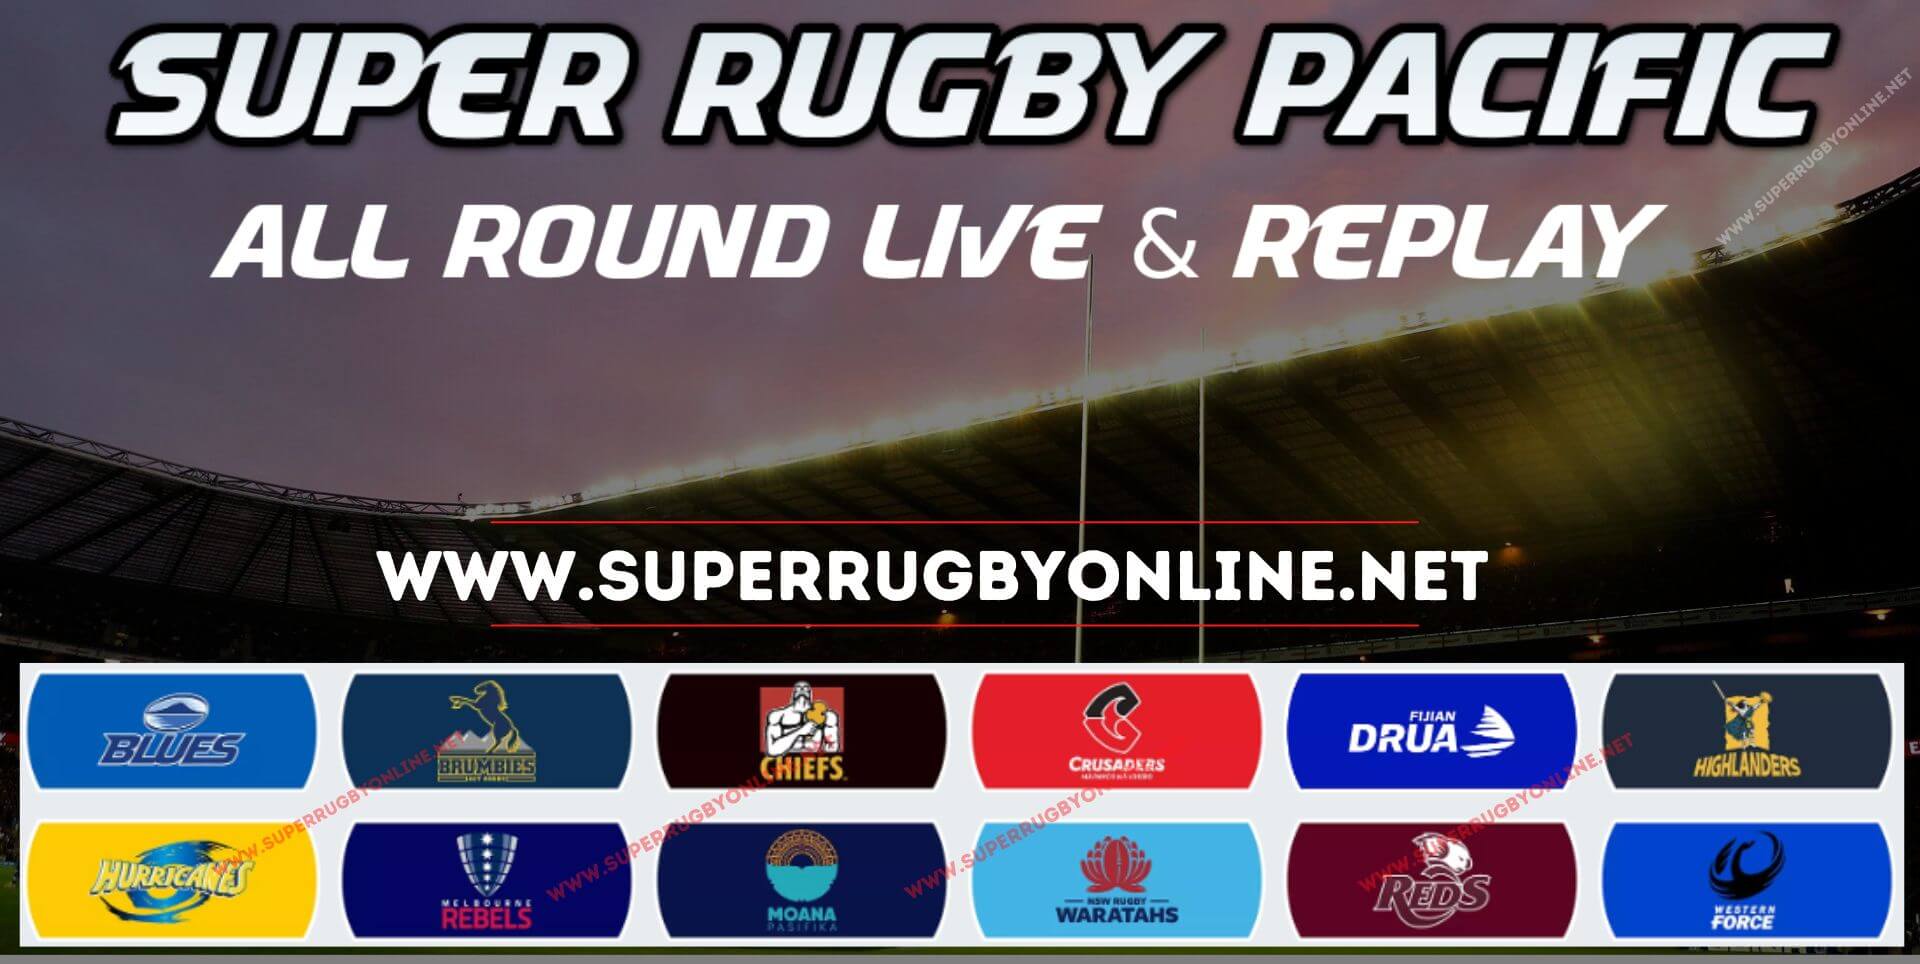 Super Rugby Pacific Confirmed Schedule